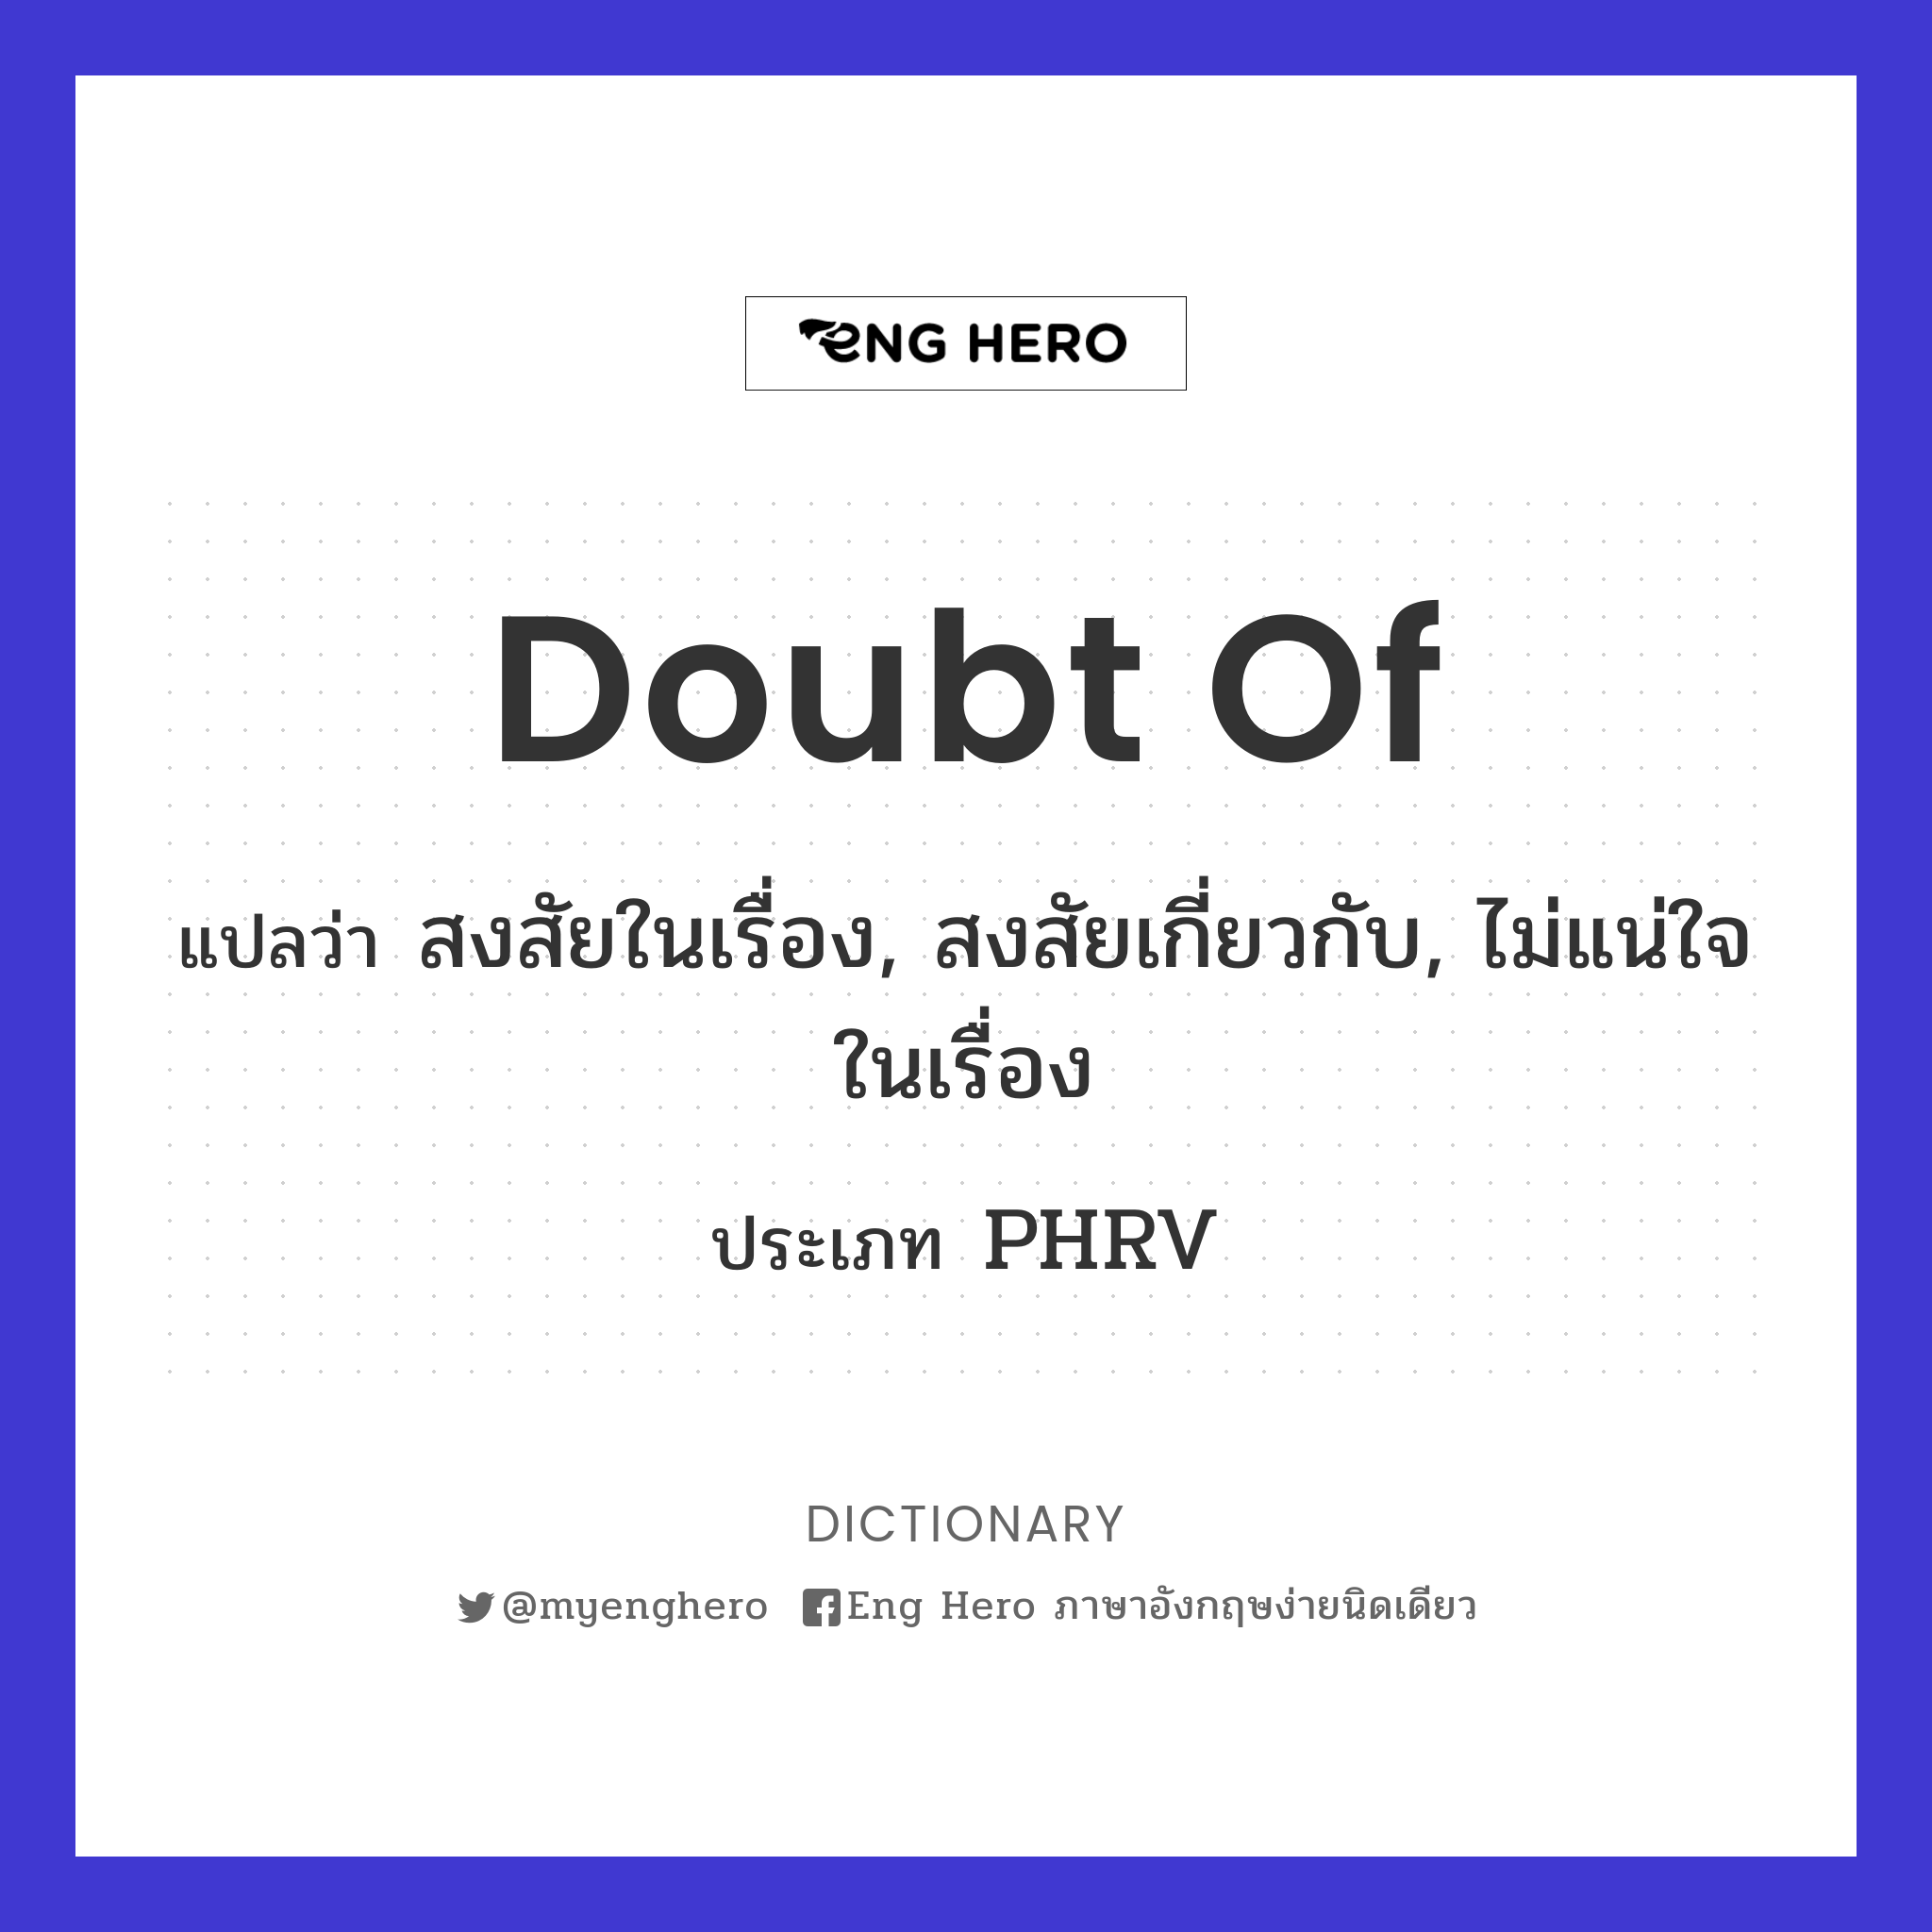 doubt of